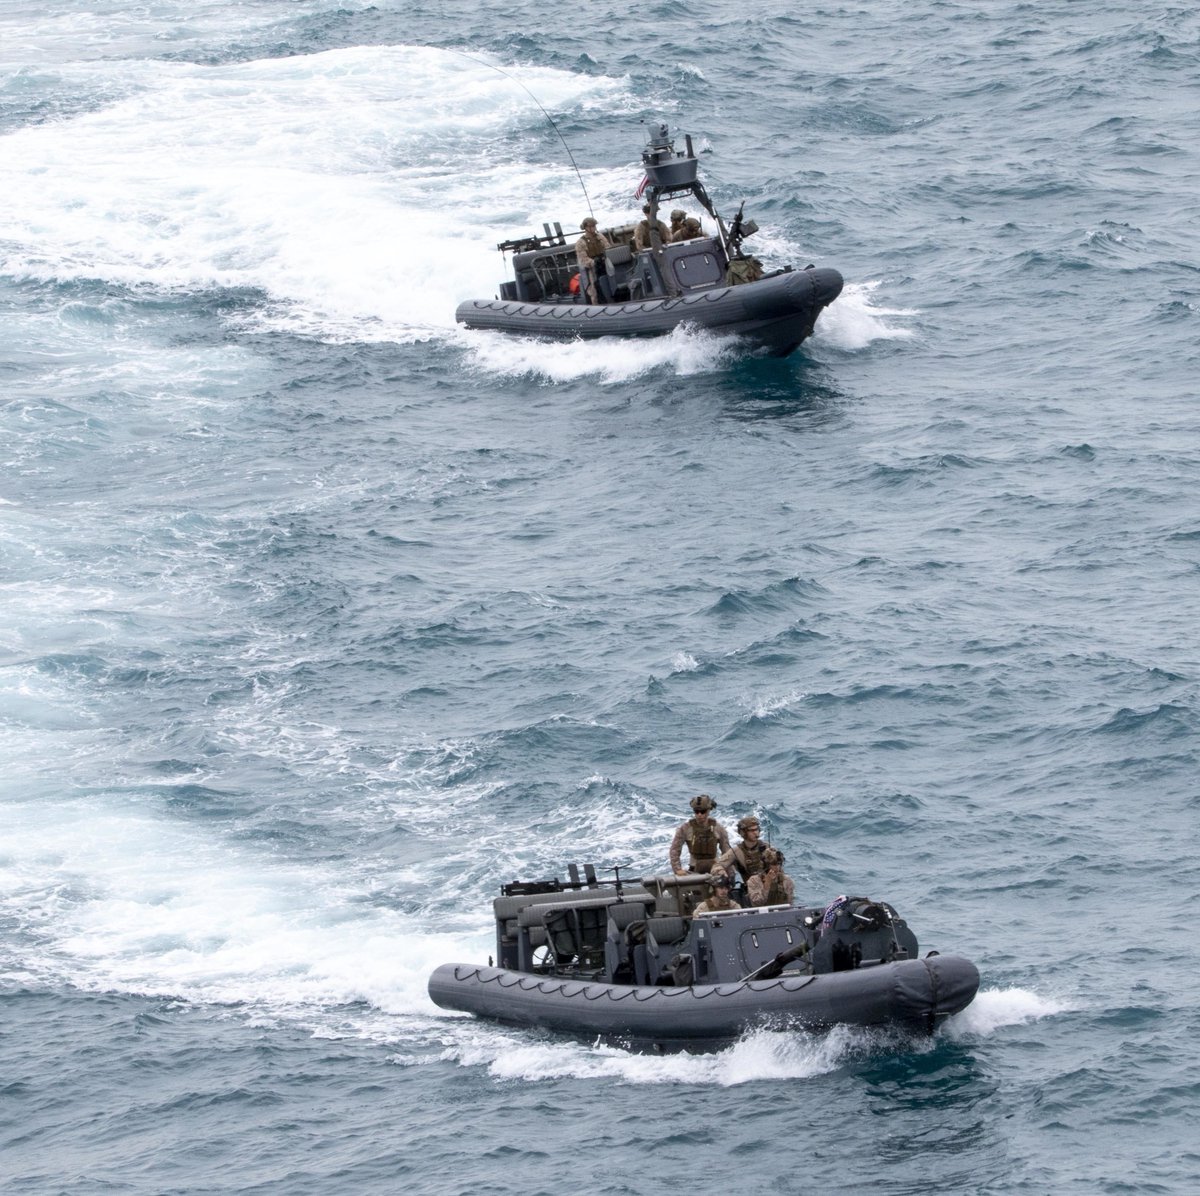 Base ship MIGUEL KEITH ESB5 and 13th MEU Marines deployed aboard ANCHORAGE LPD23 conducted Maritime Raiding Force platoon exercises 7 Jan. in crowded Natuna Sea waters in the South China Sea, scene of considerable recent Chinese, Vietnamese and Indonesian coast guard activity